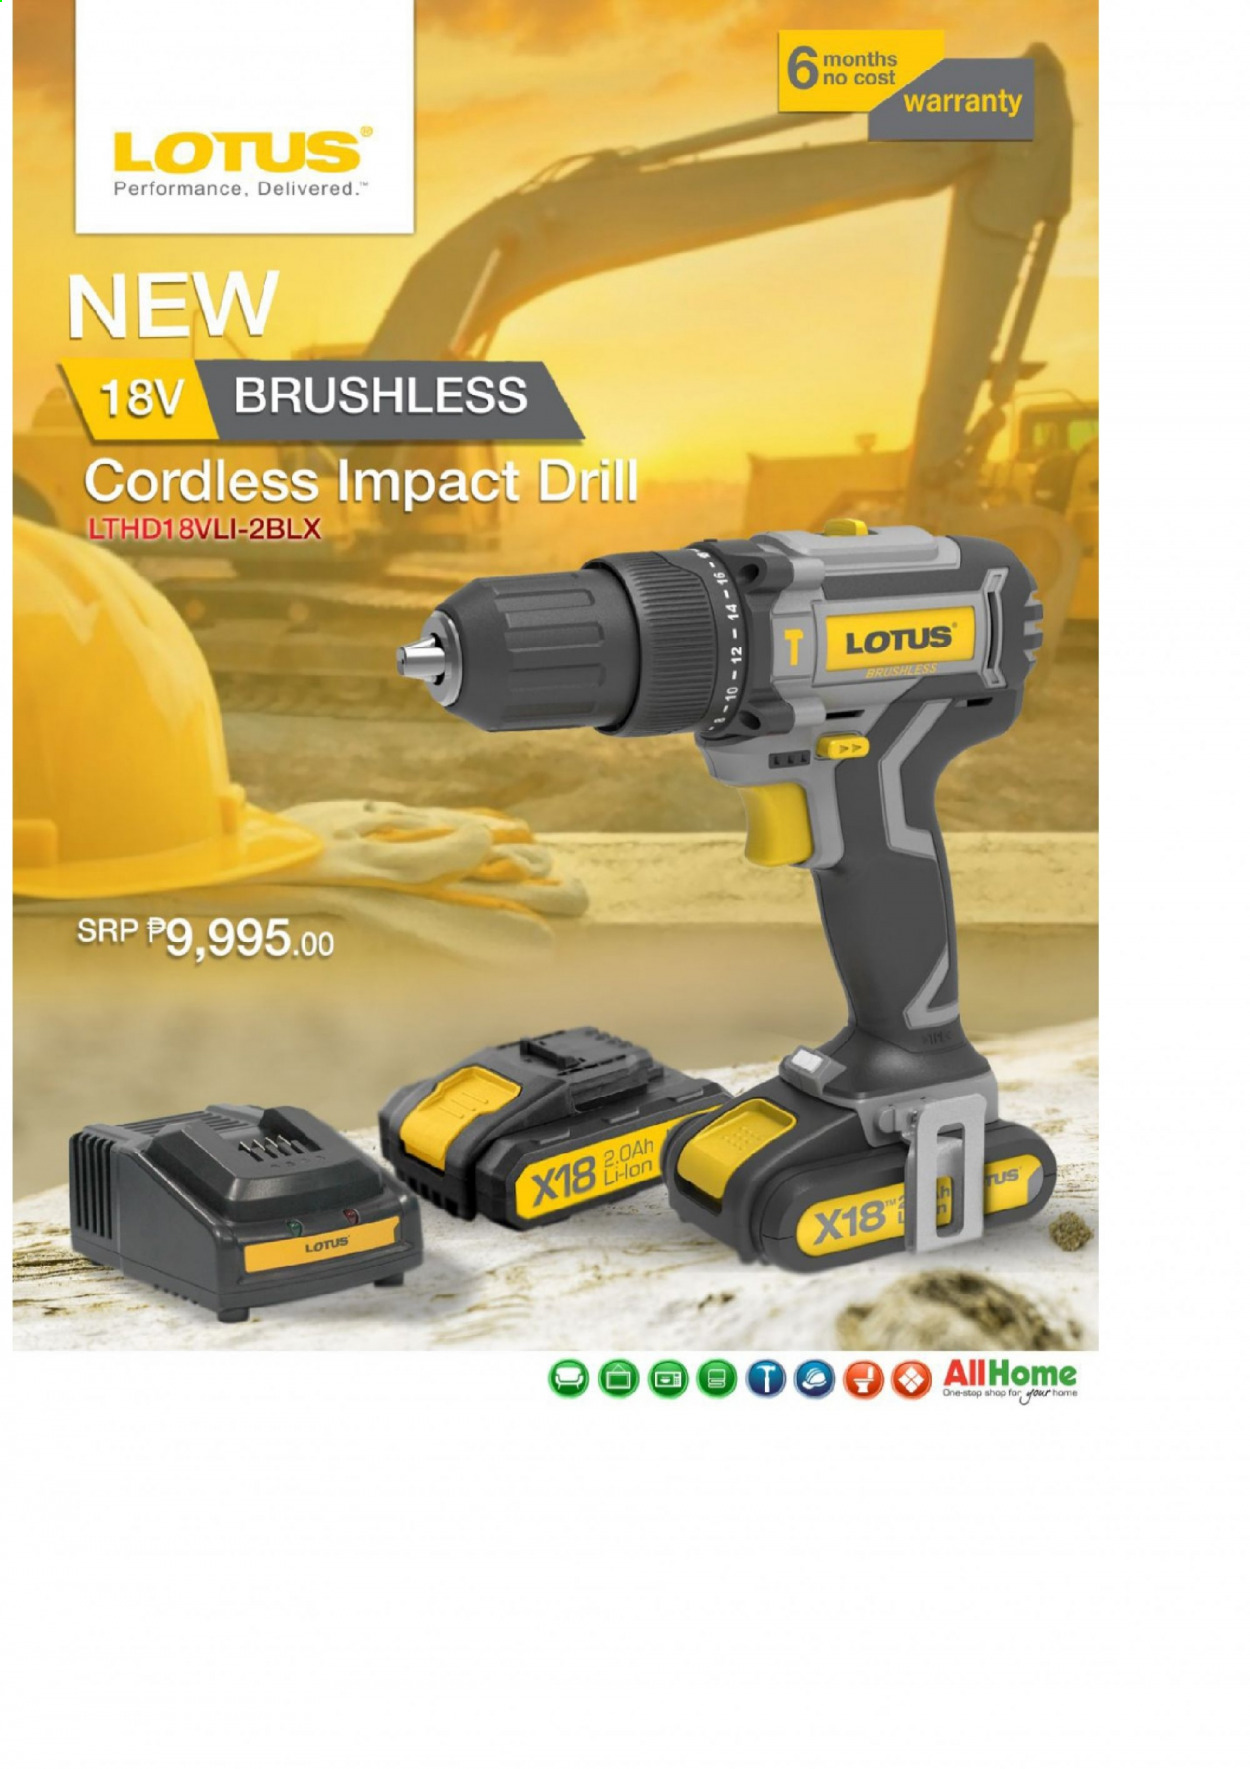 thumbnail - AllHome offer  - 23.3.2021 - 30.6.2021 - Sales products - Lotus, drill. Page 105.